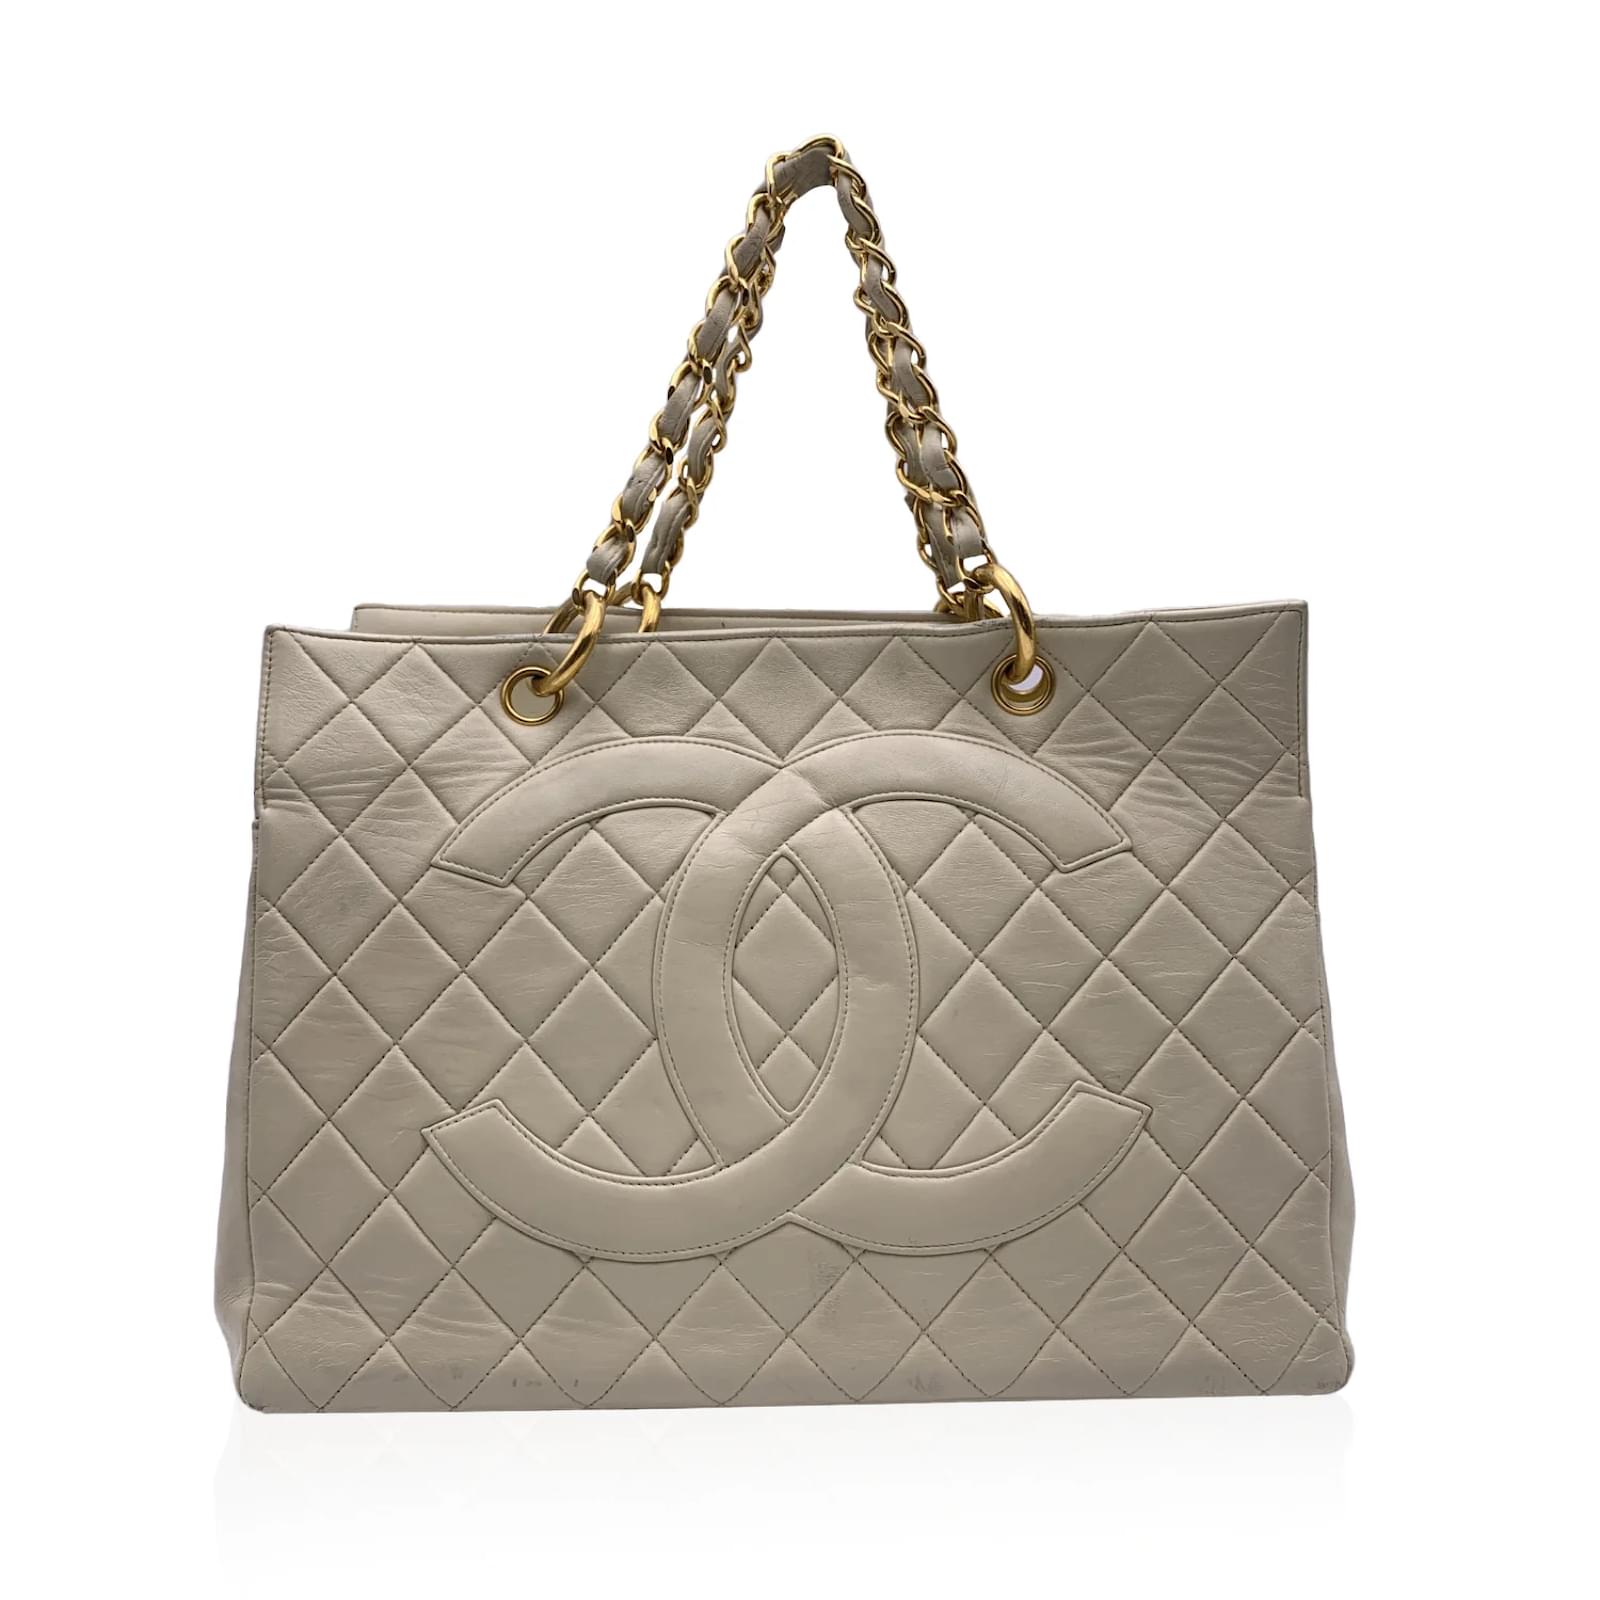 Chanel Vintage Beige Quilted Leather GST 1997 grand shopping tote